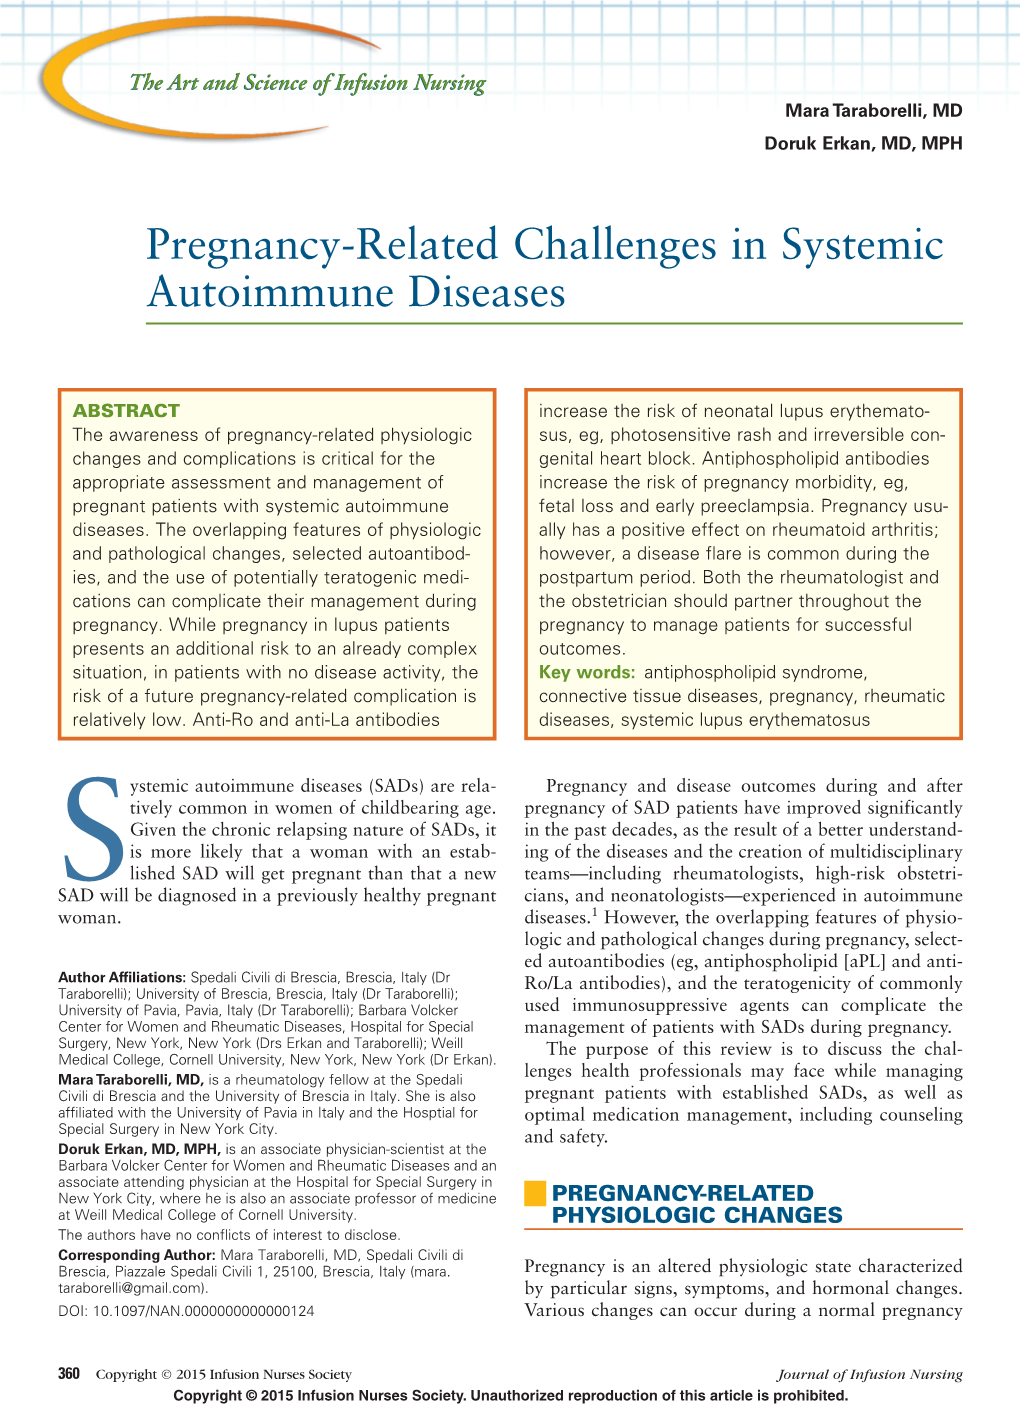 Pregnancy-Related Challenges in Systemic Autoimmune Diseases